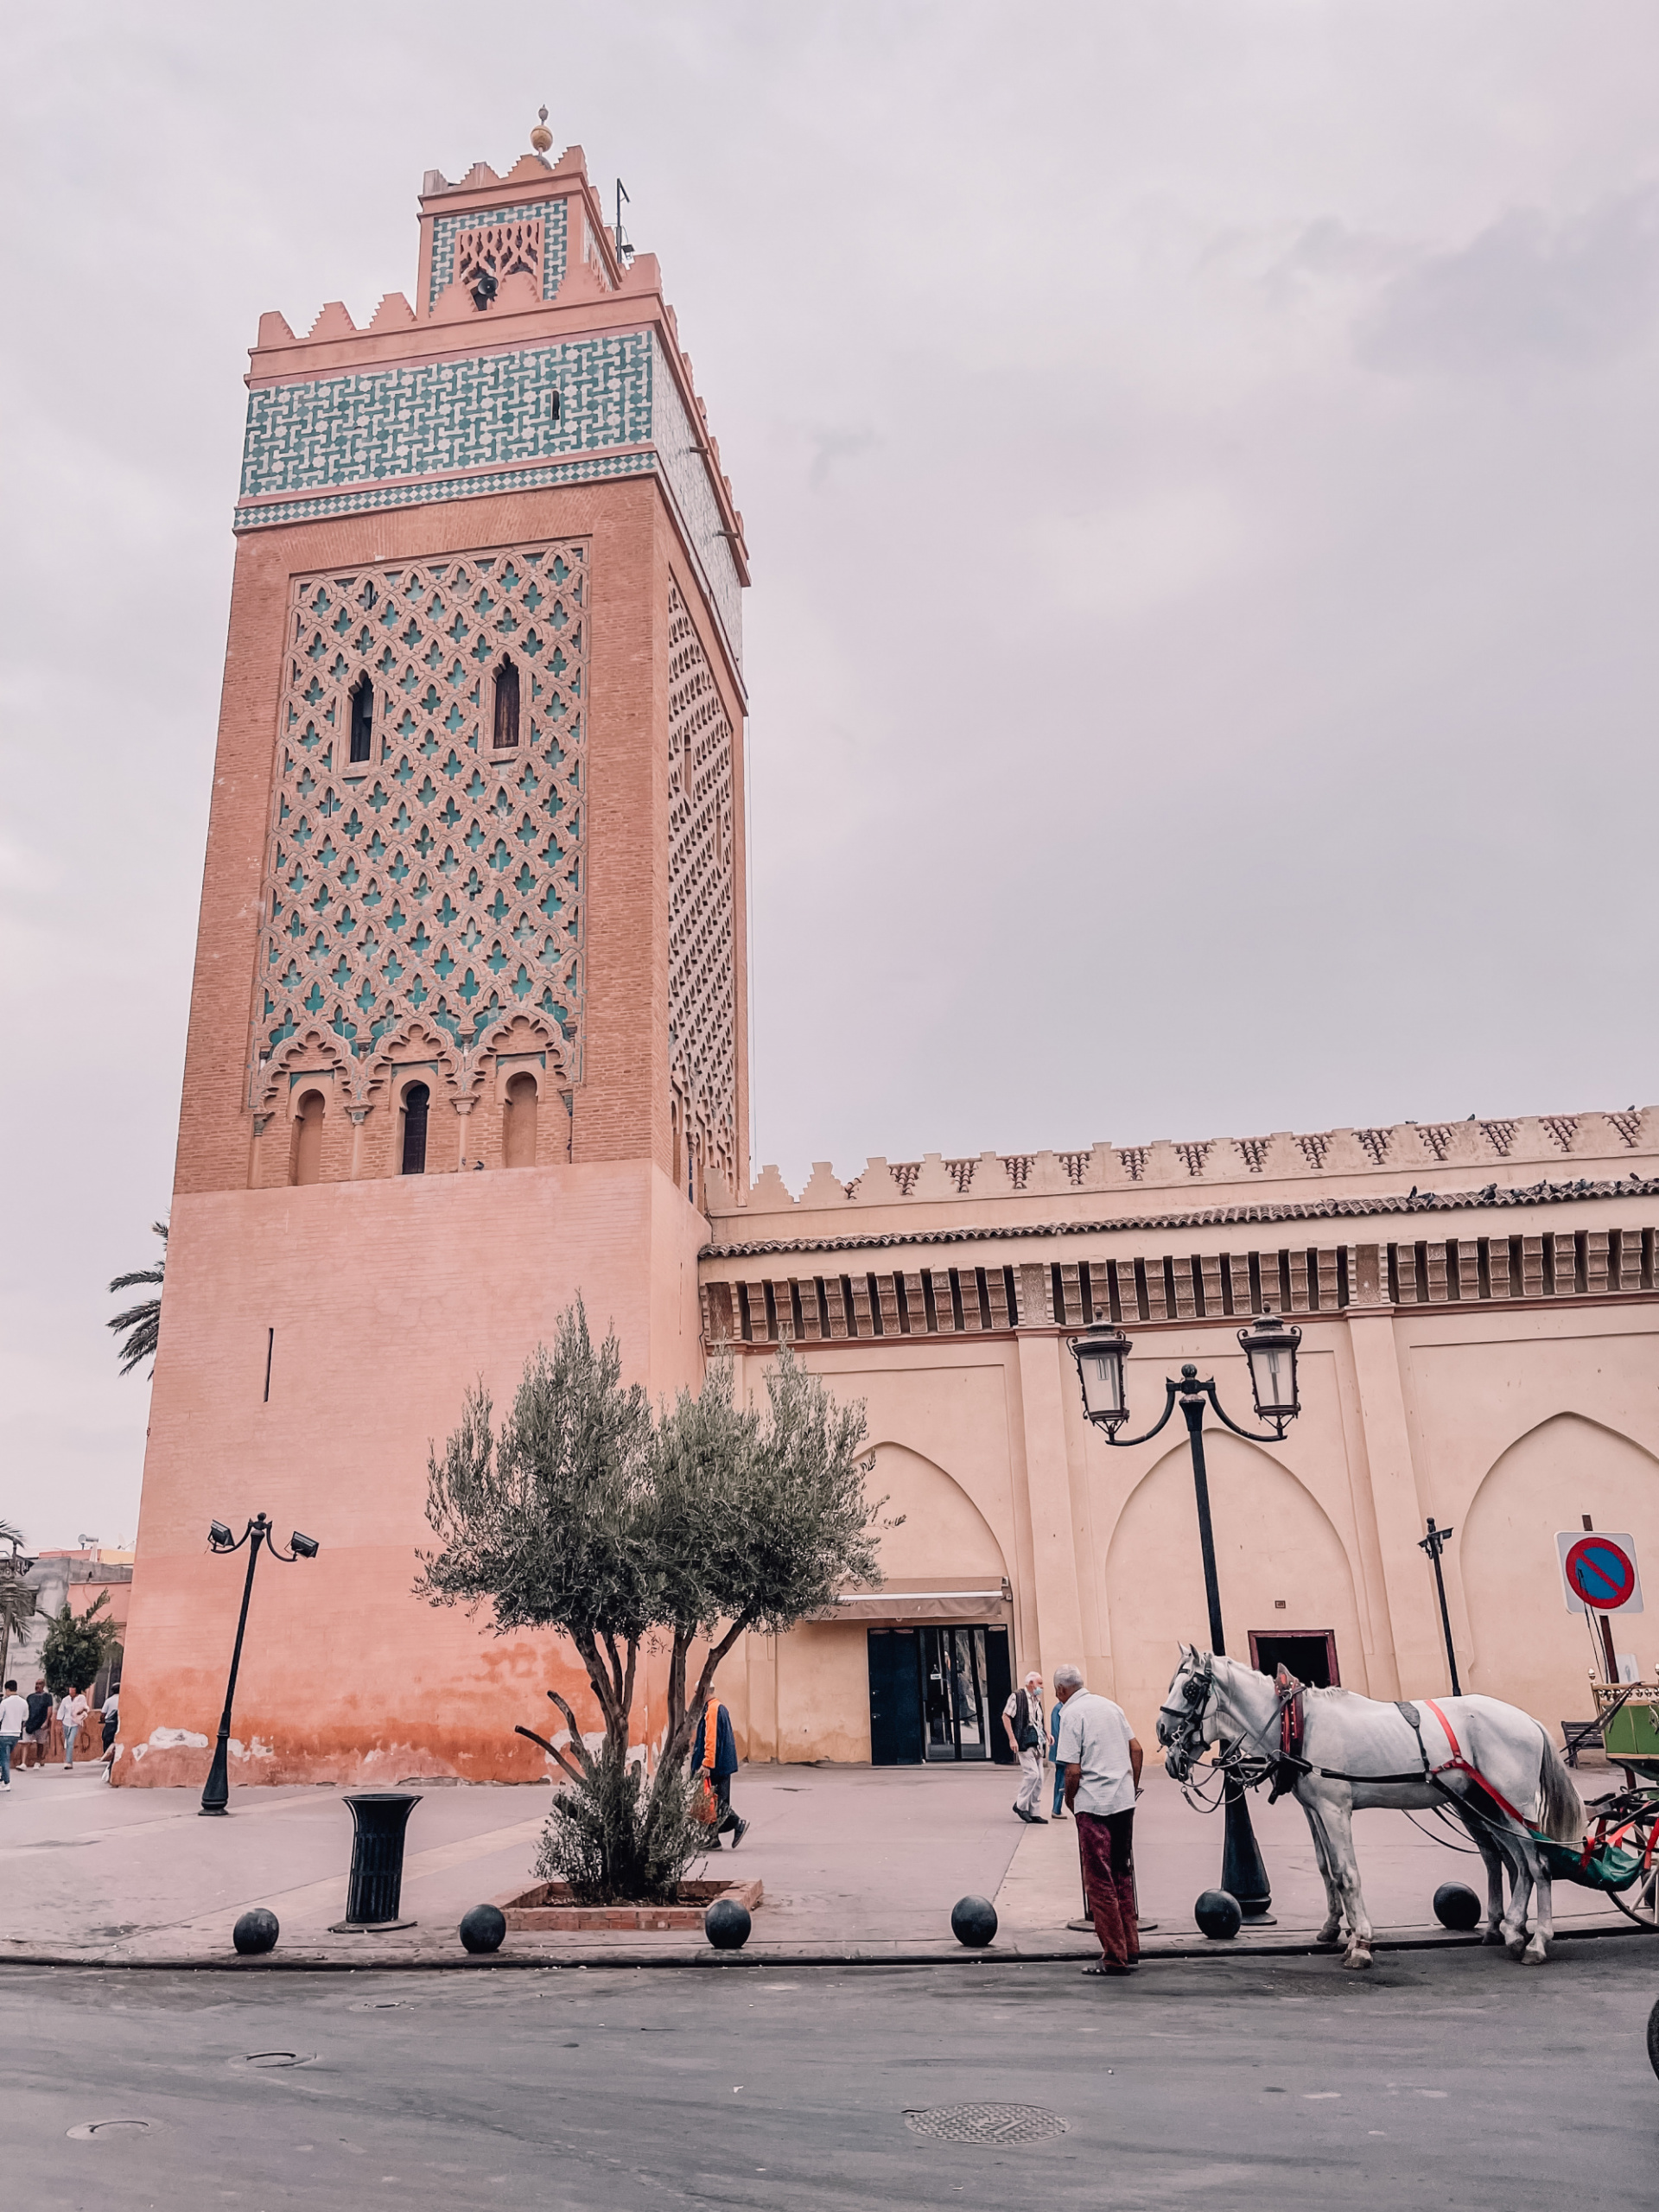 weekend trips from spain, weekend trips from madrid, where to visit near spain, best weekend trips from madrid, erin busbee, Marrakech, morocco, riding camels in morocco